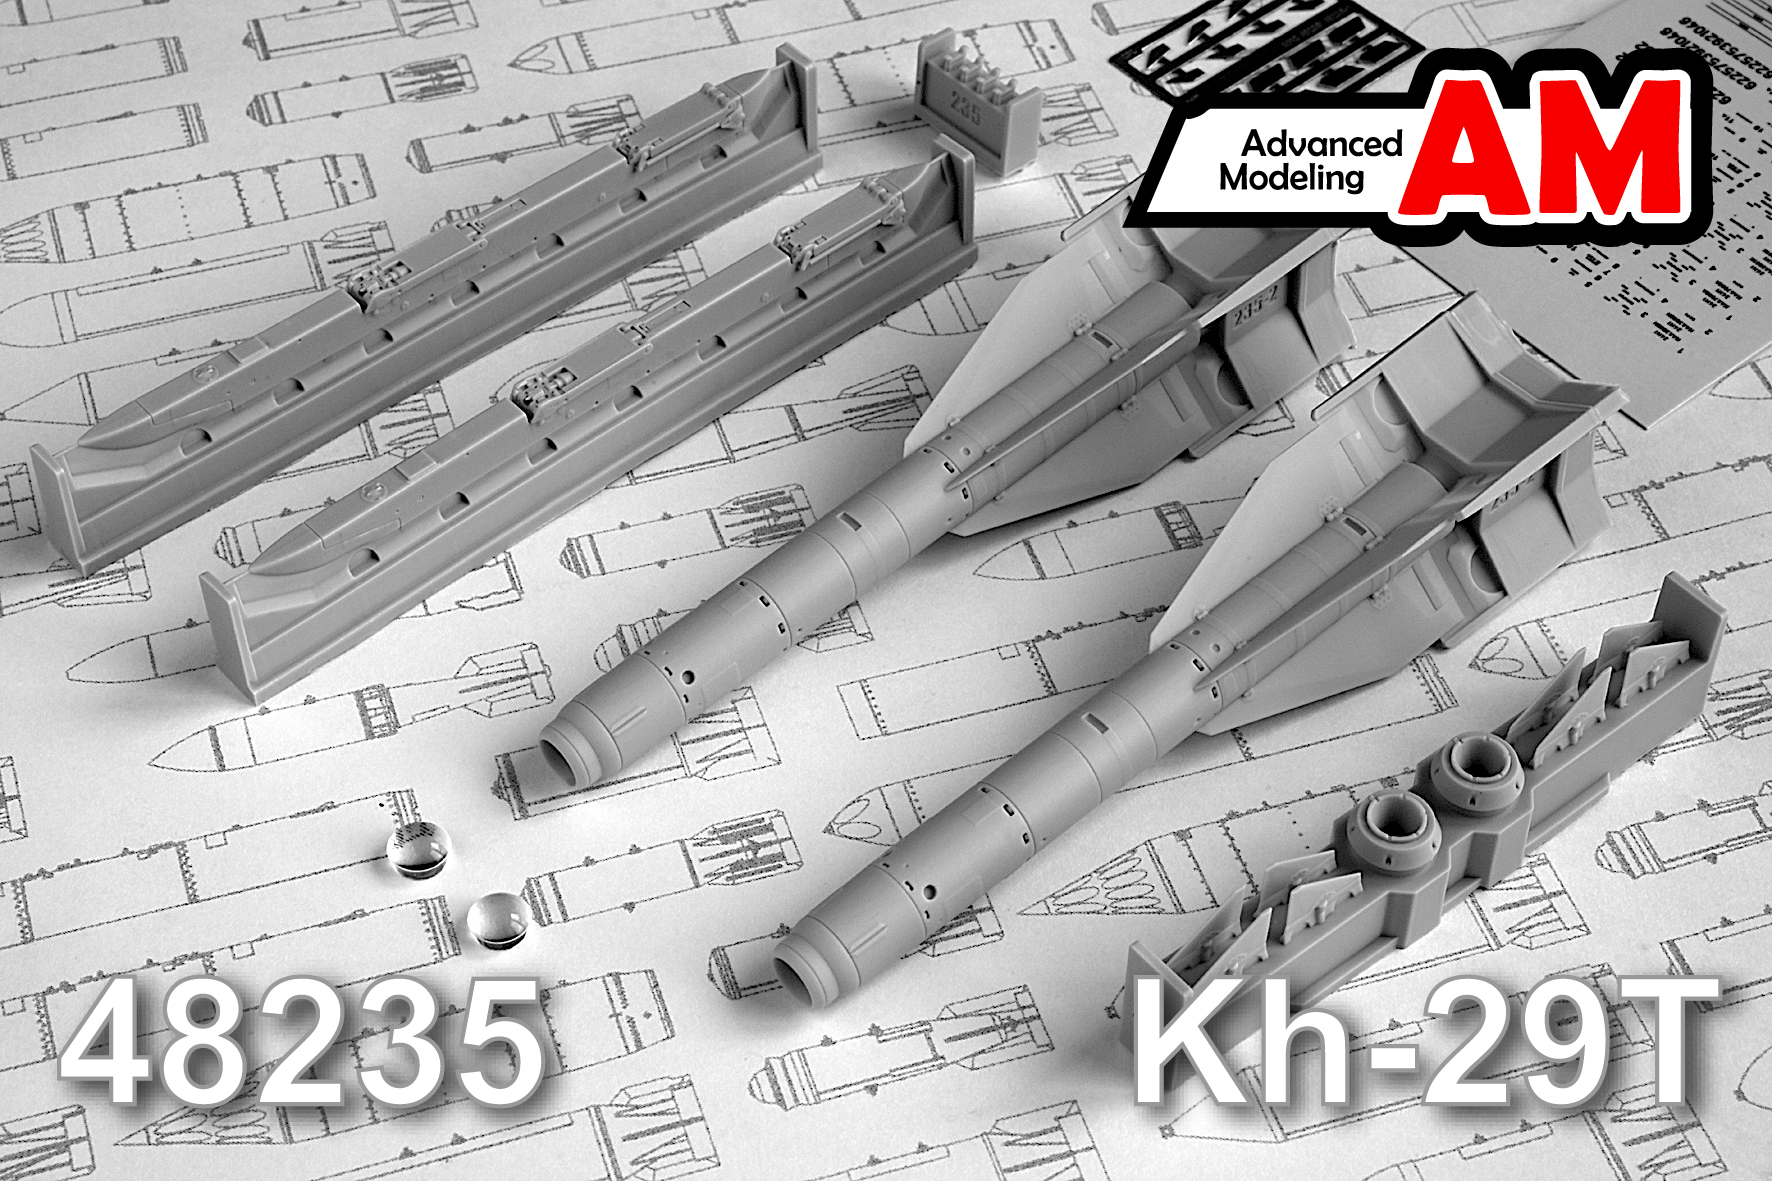 Additions (3D resin printing) 1/48 Aircraft guided missile Kh-29T with launcher AKU-58-1 (Advanced Modeling) 